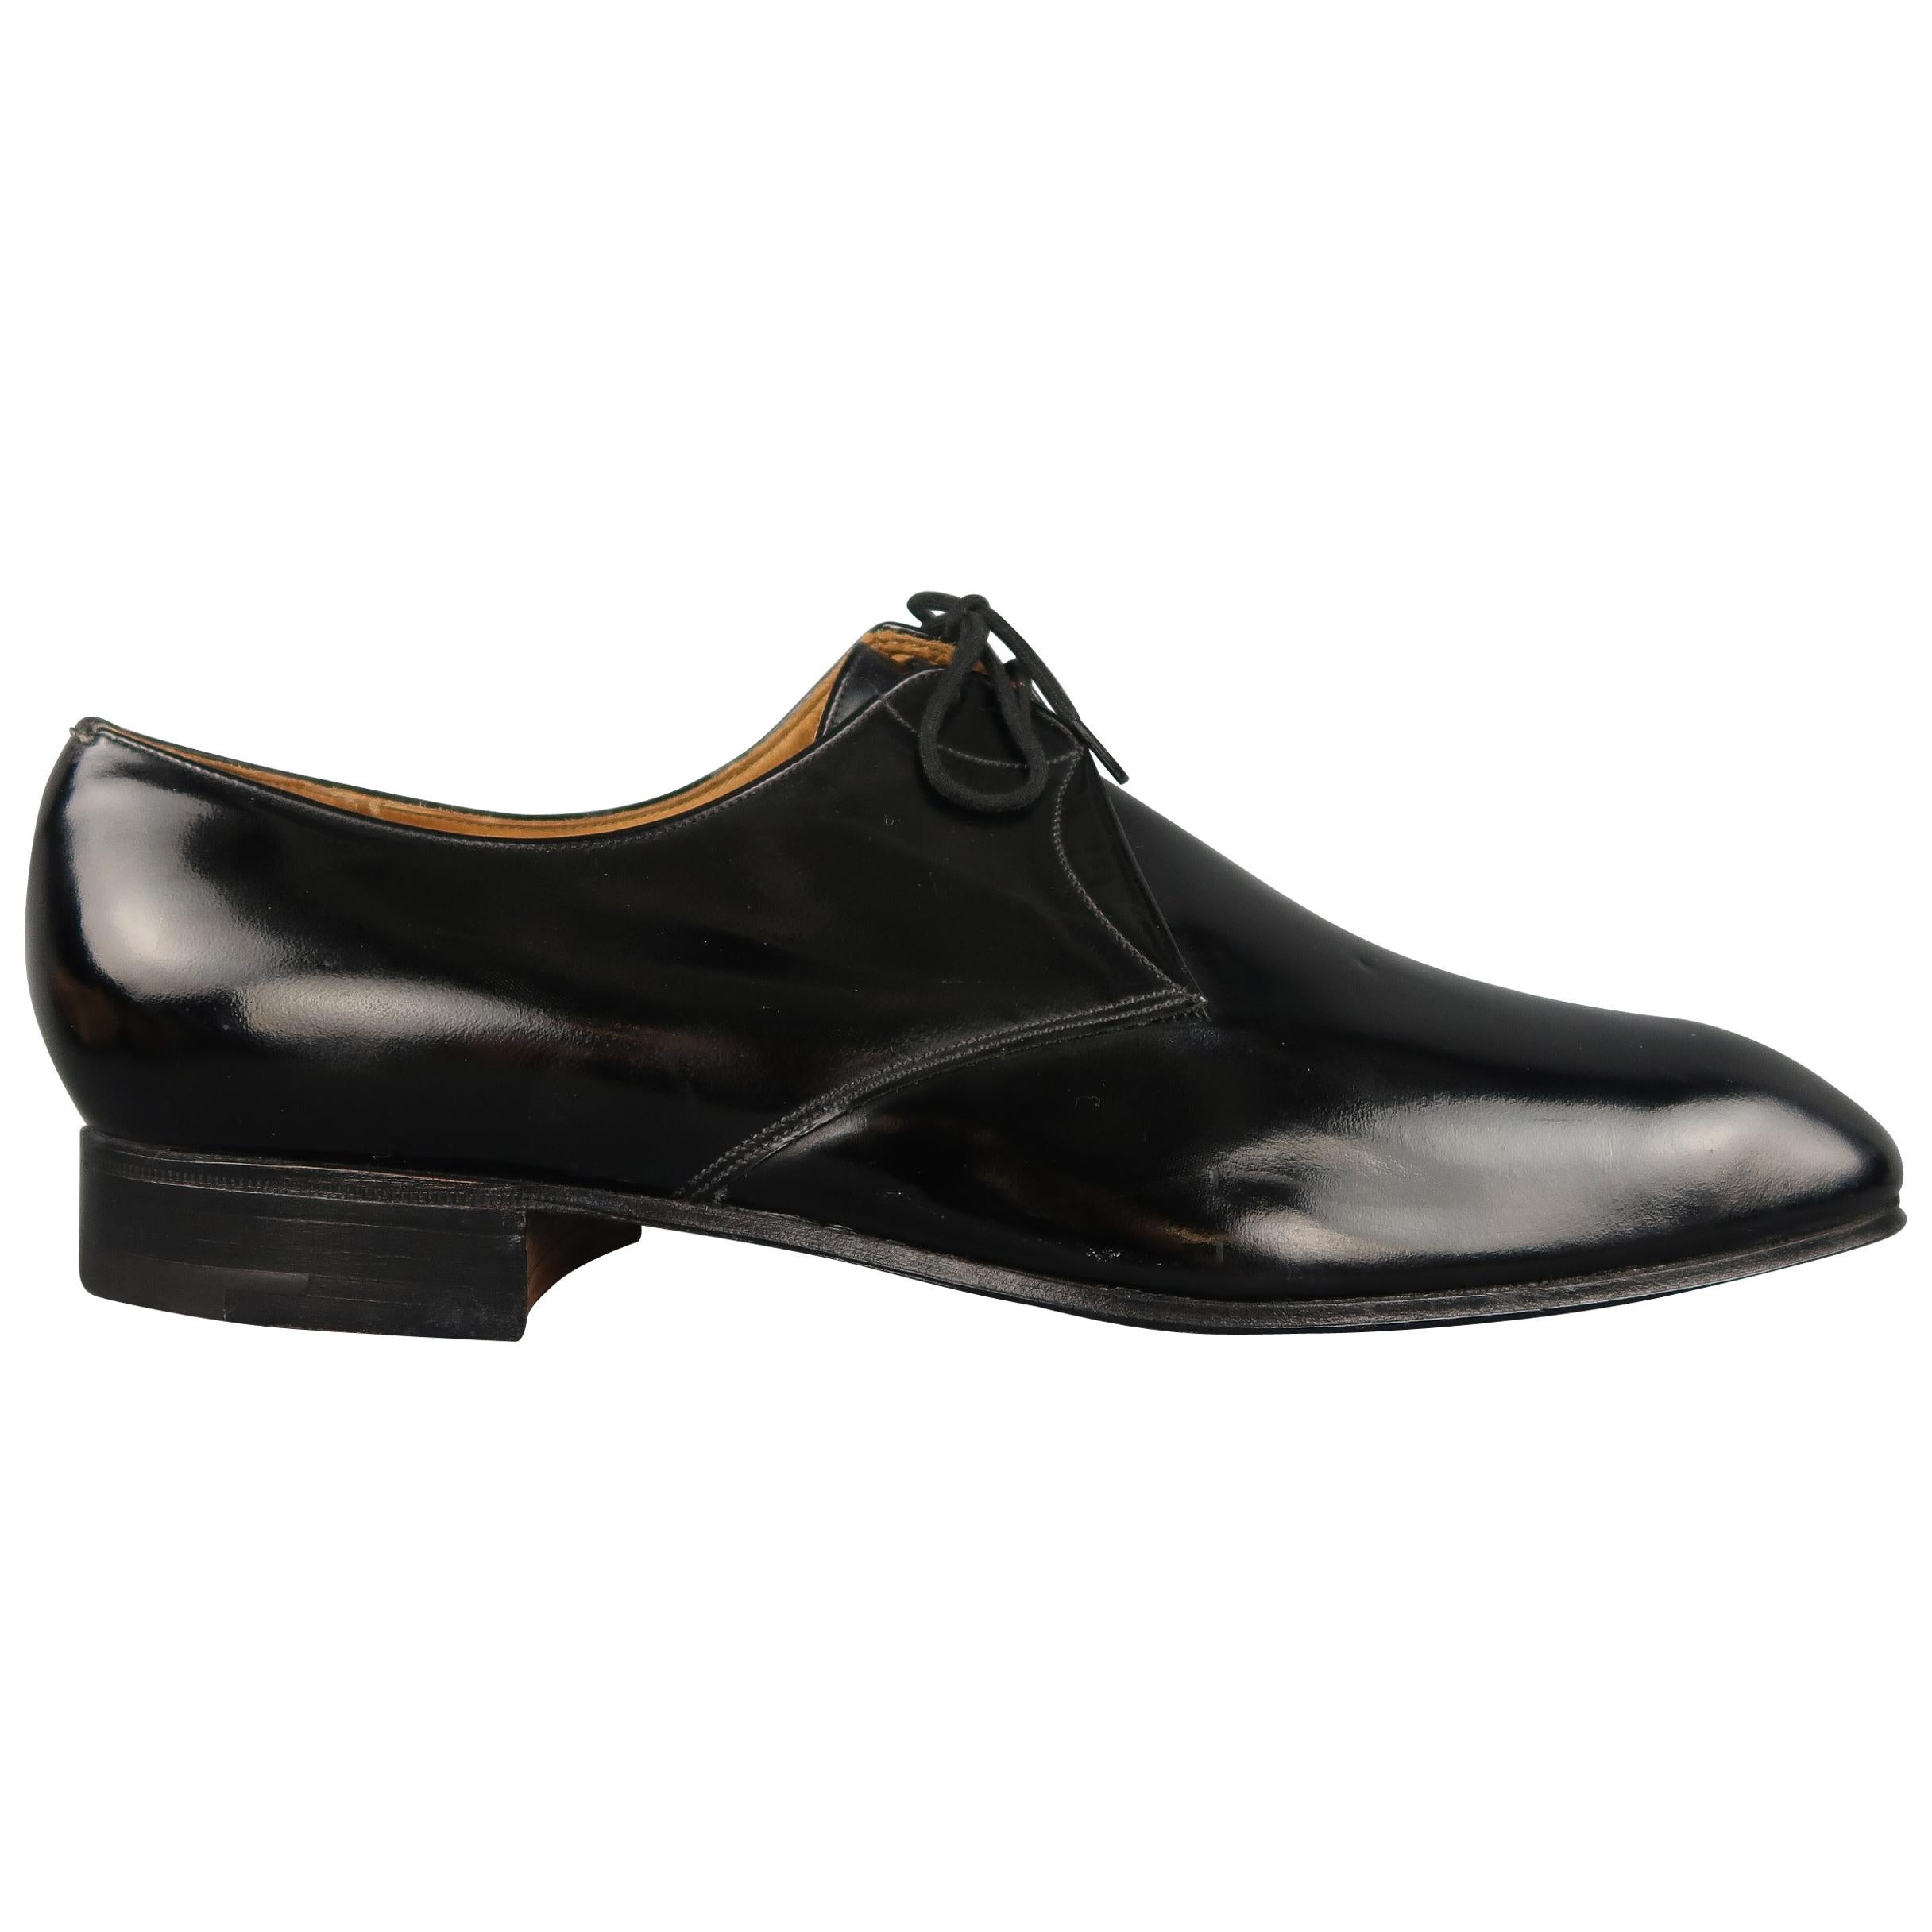 Church's Dress Shoes - Black Patent Leather Lace Up Derby